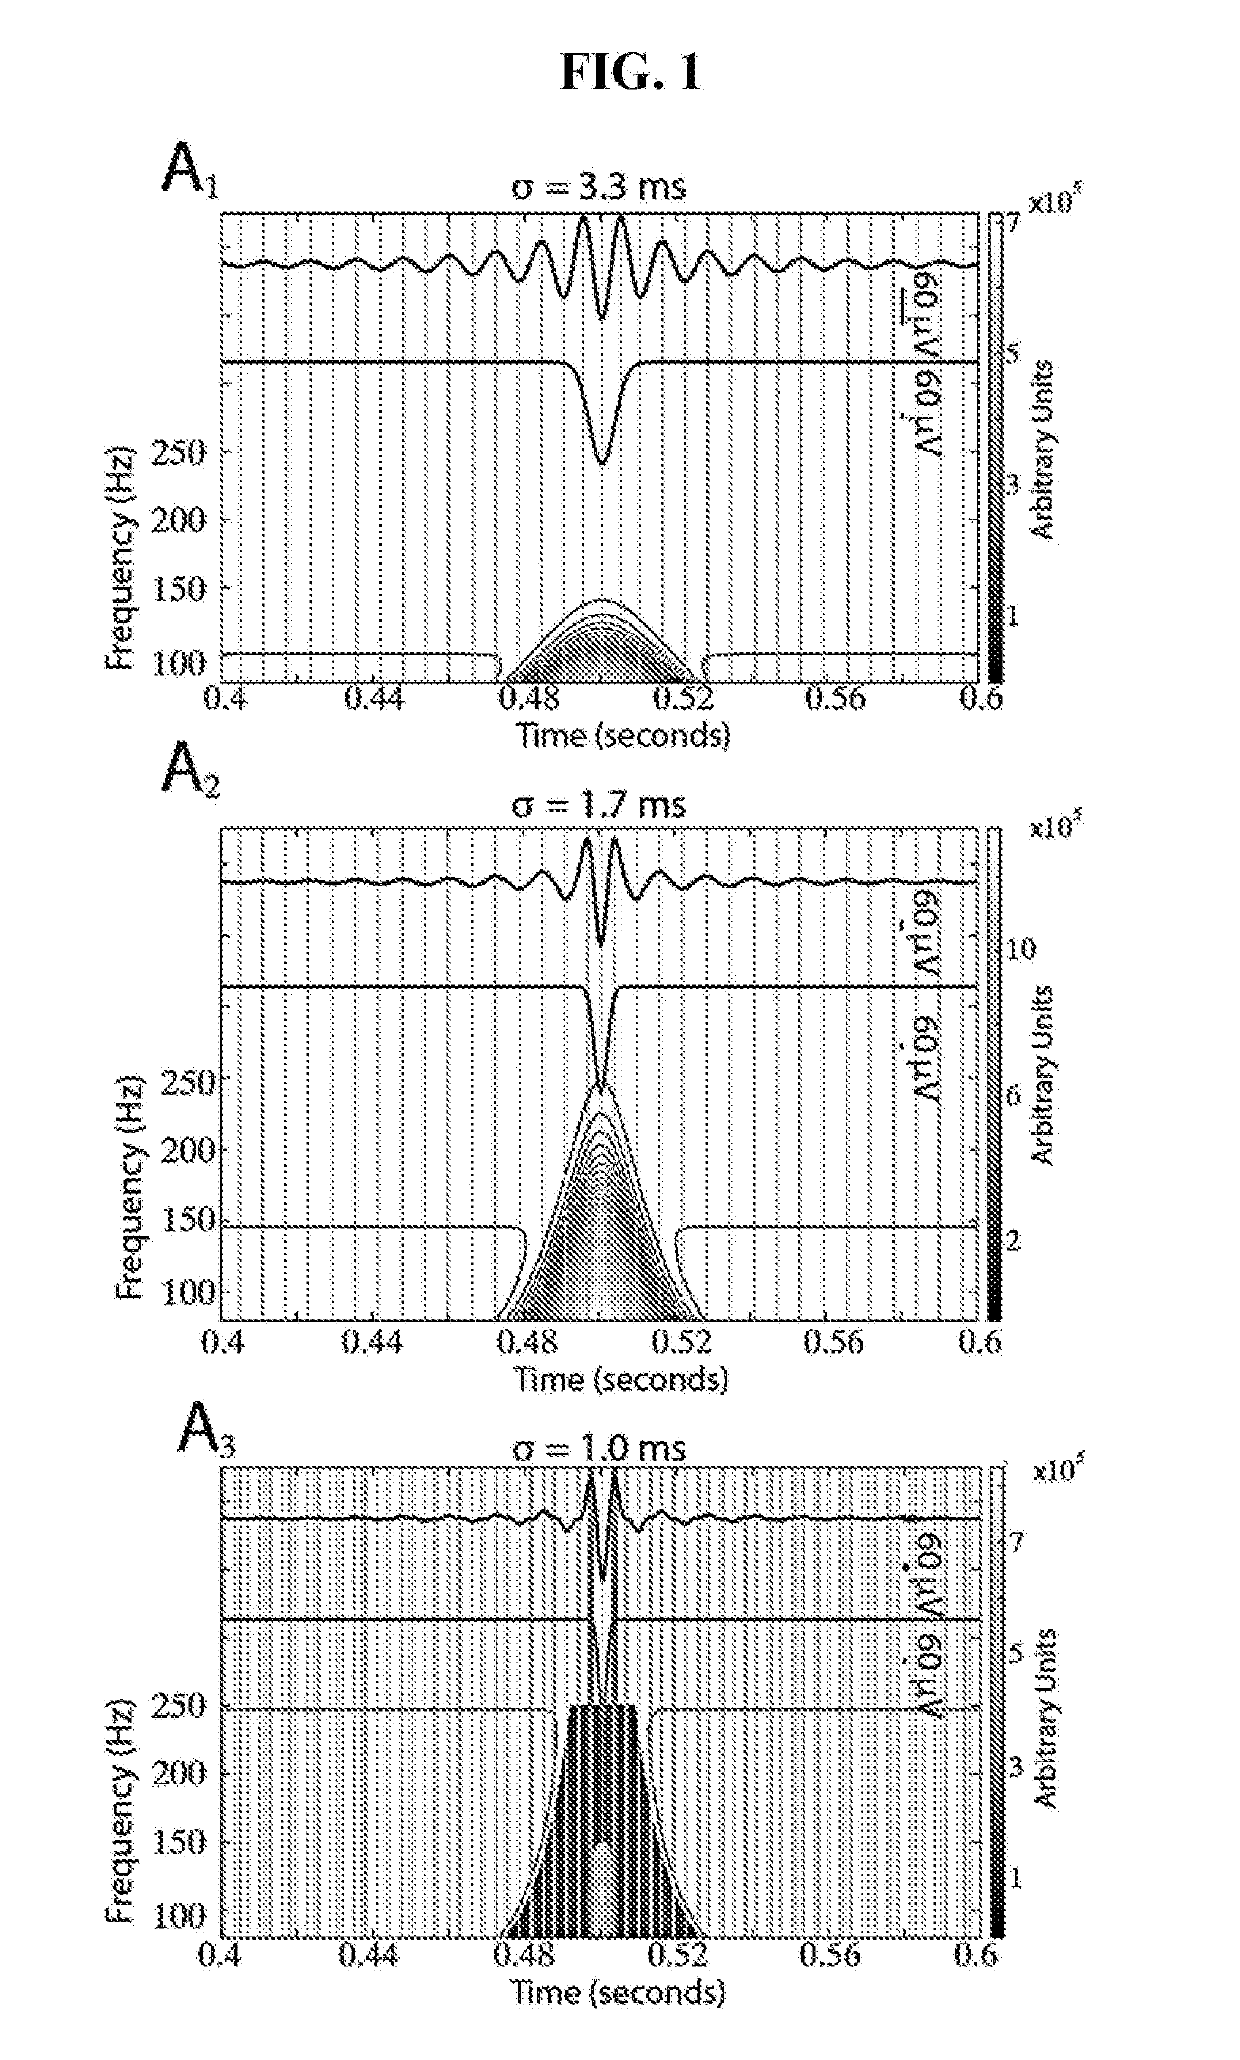 Signal processing method for distinguishing and characterizing high-frequency oscillations